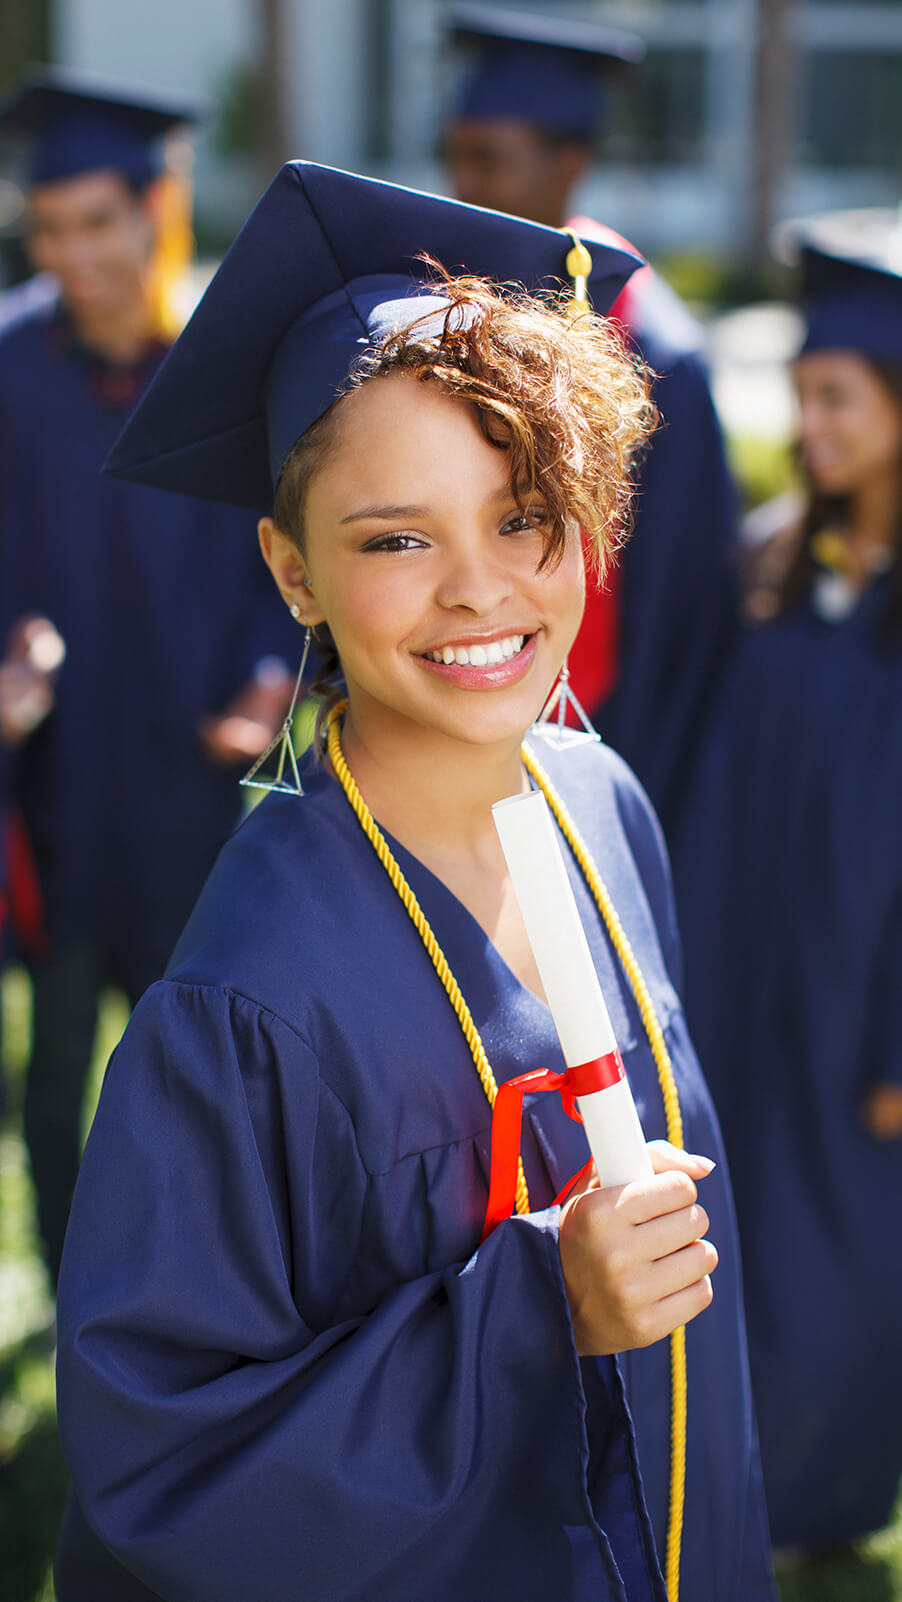 Young female student wearing a graduation cap and gown, and a dimploma in her hand.